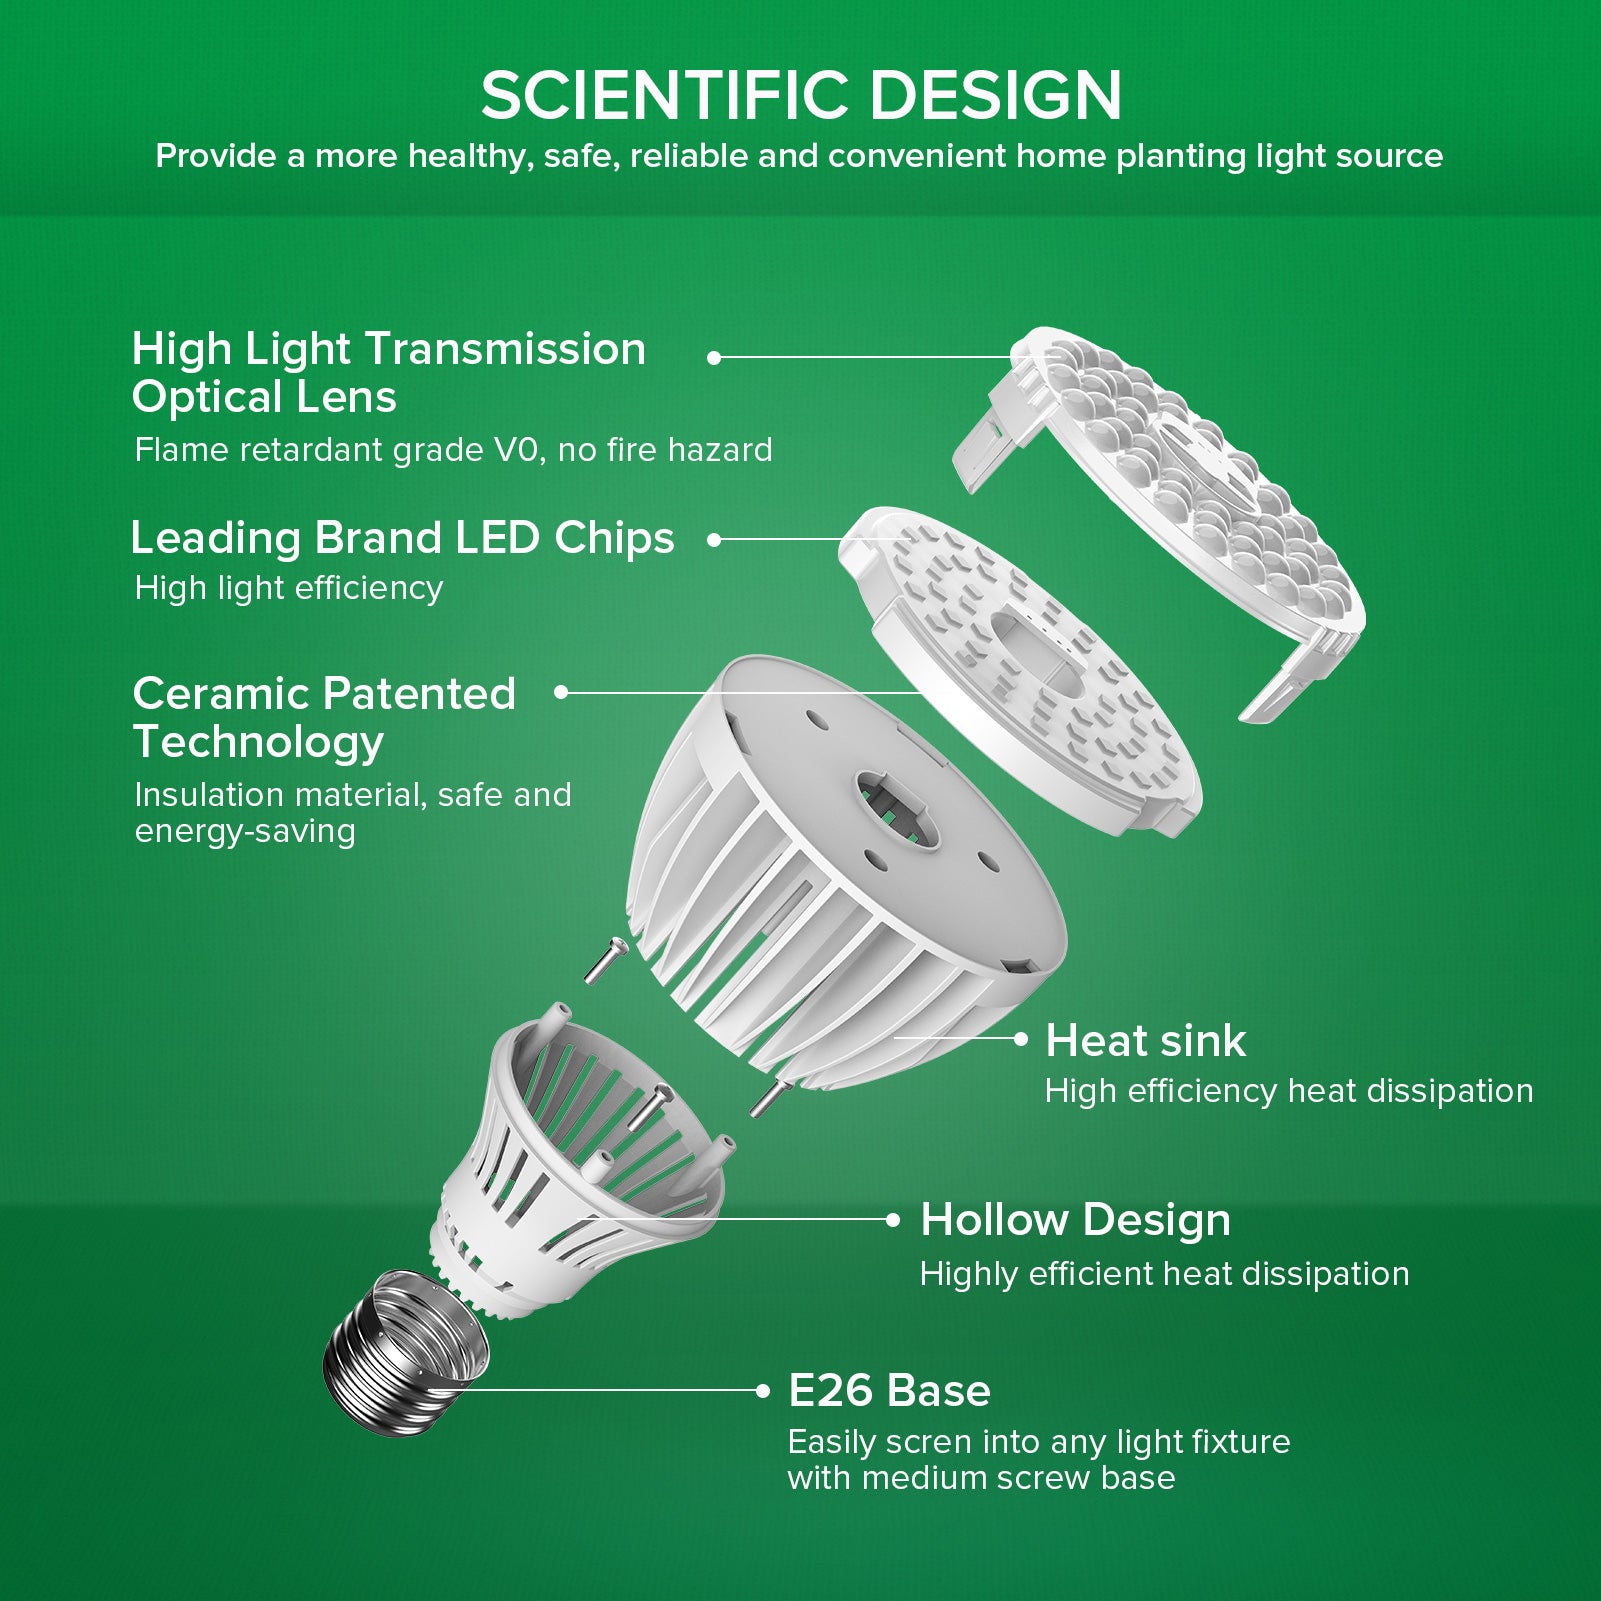 PAR25 24W LED Grow Light Bulb for Seeds and Greens with hollow design, high quality IC driver chip, full spectrum led chips and high light transmission optical lens